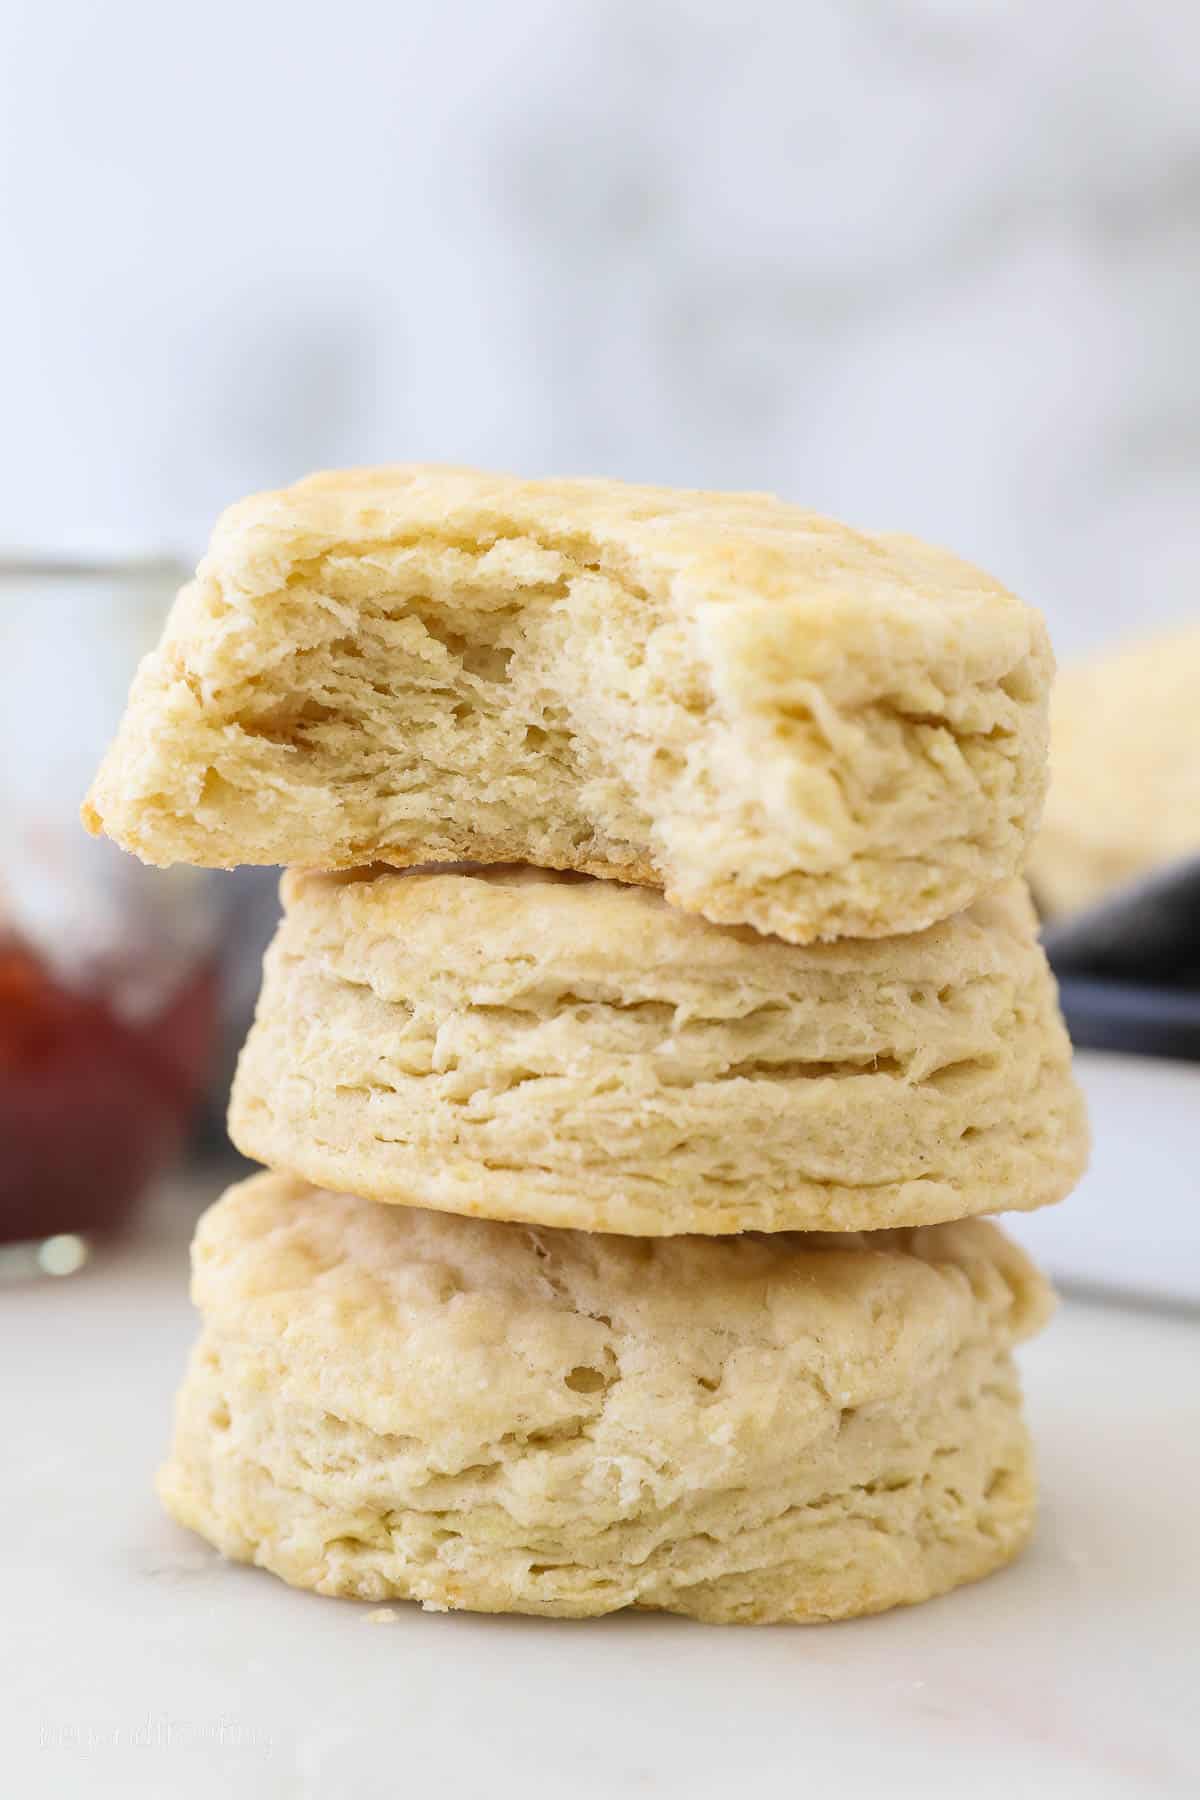 A stack of Buttermilk Biscuits with one bite taken out of the top biscuit. Biscuit layers are visible.